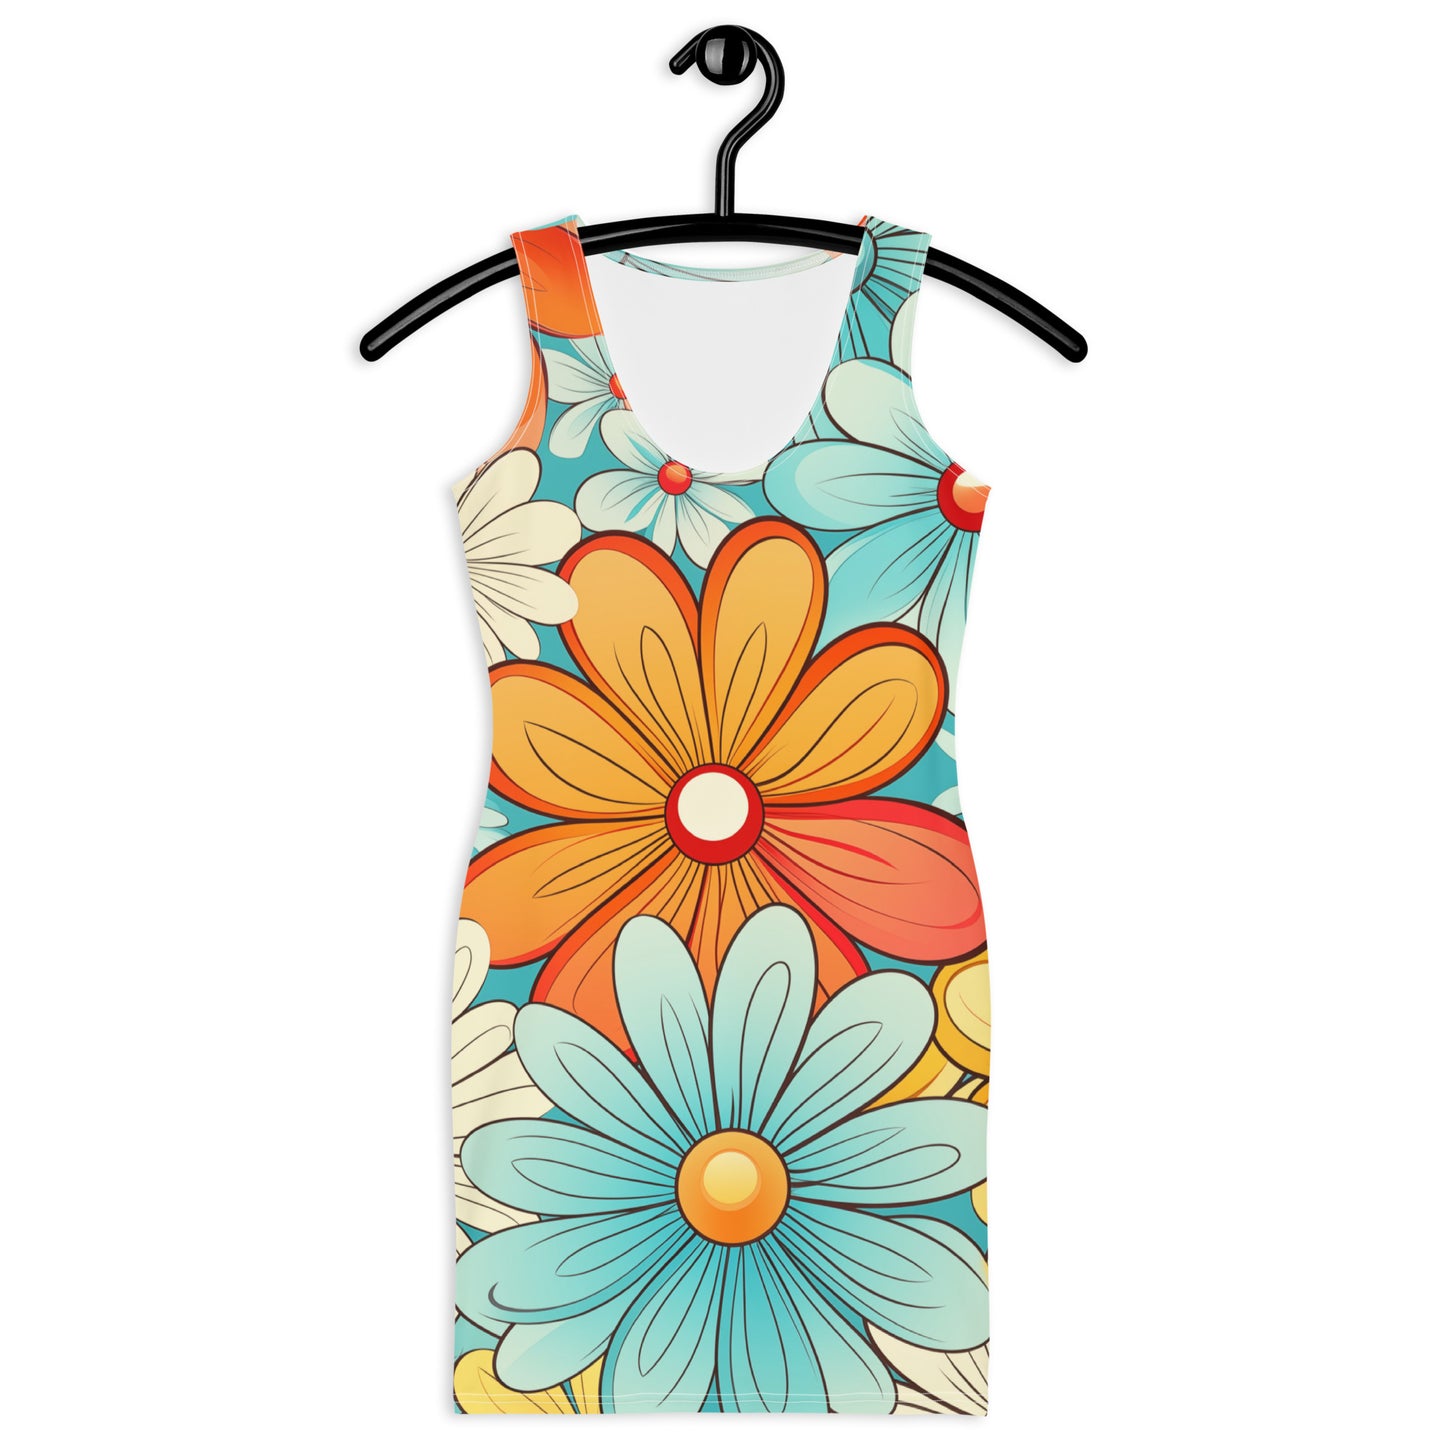 Groovy Floral Bodycon Dress Women, 70s 1970s Flower Power Pencil Fitted Homecoming Sleeveless Mini Cute Cocktail Party Prom Sexy Outfit